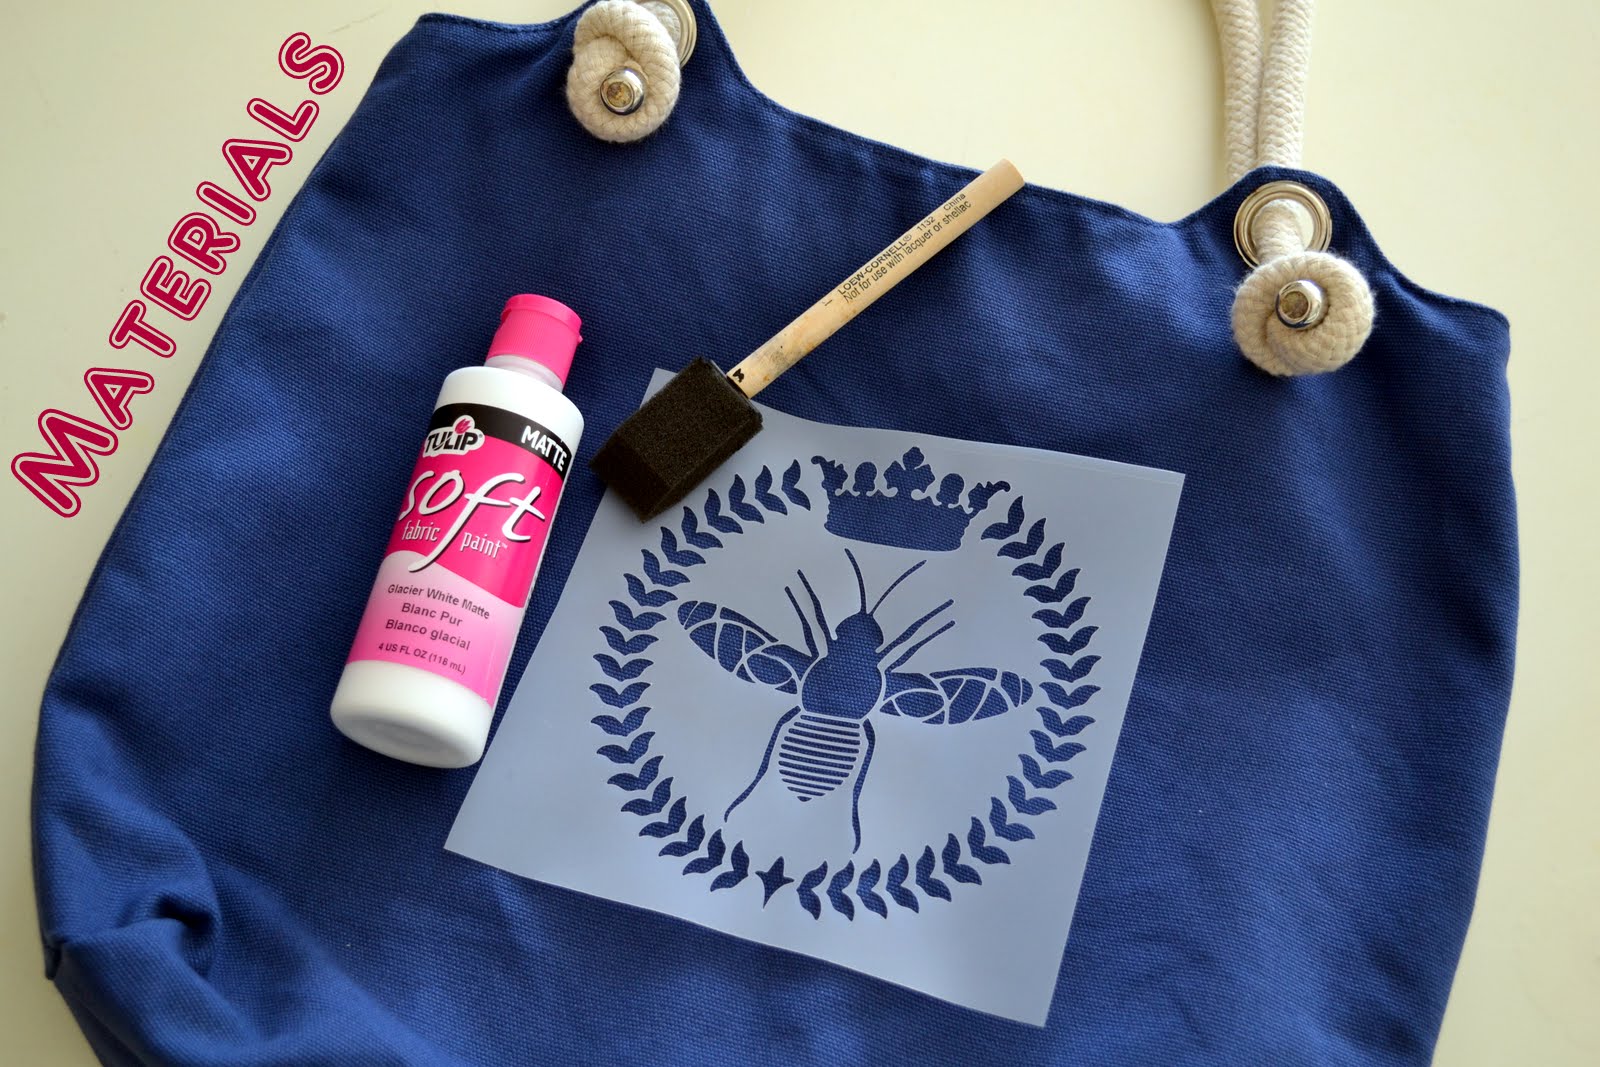 How to Stencil a Tote Bag in 4 Easy Steps - Stencil Stories